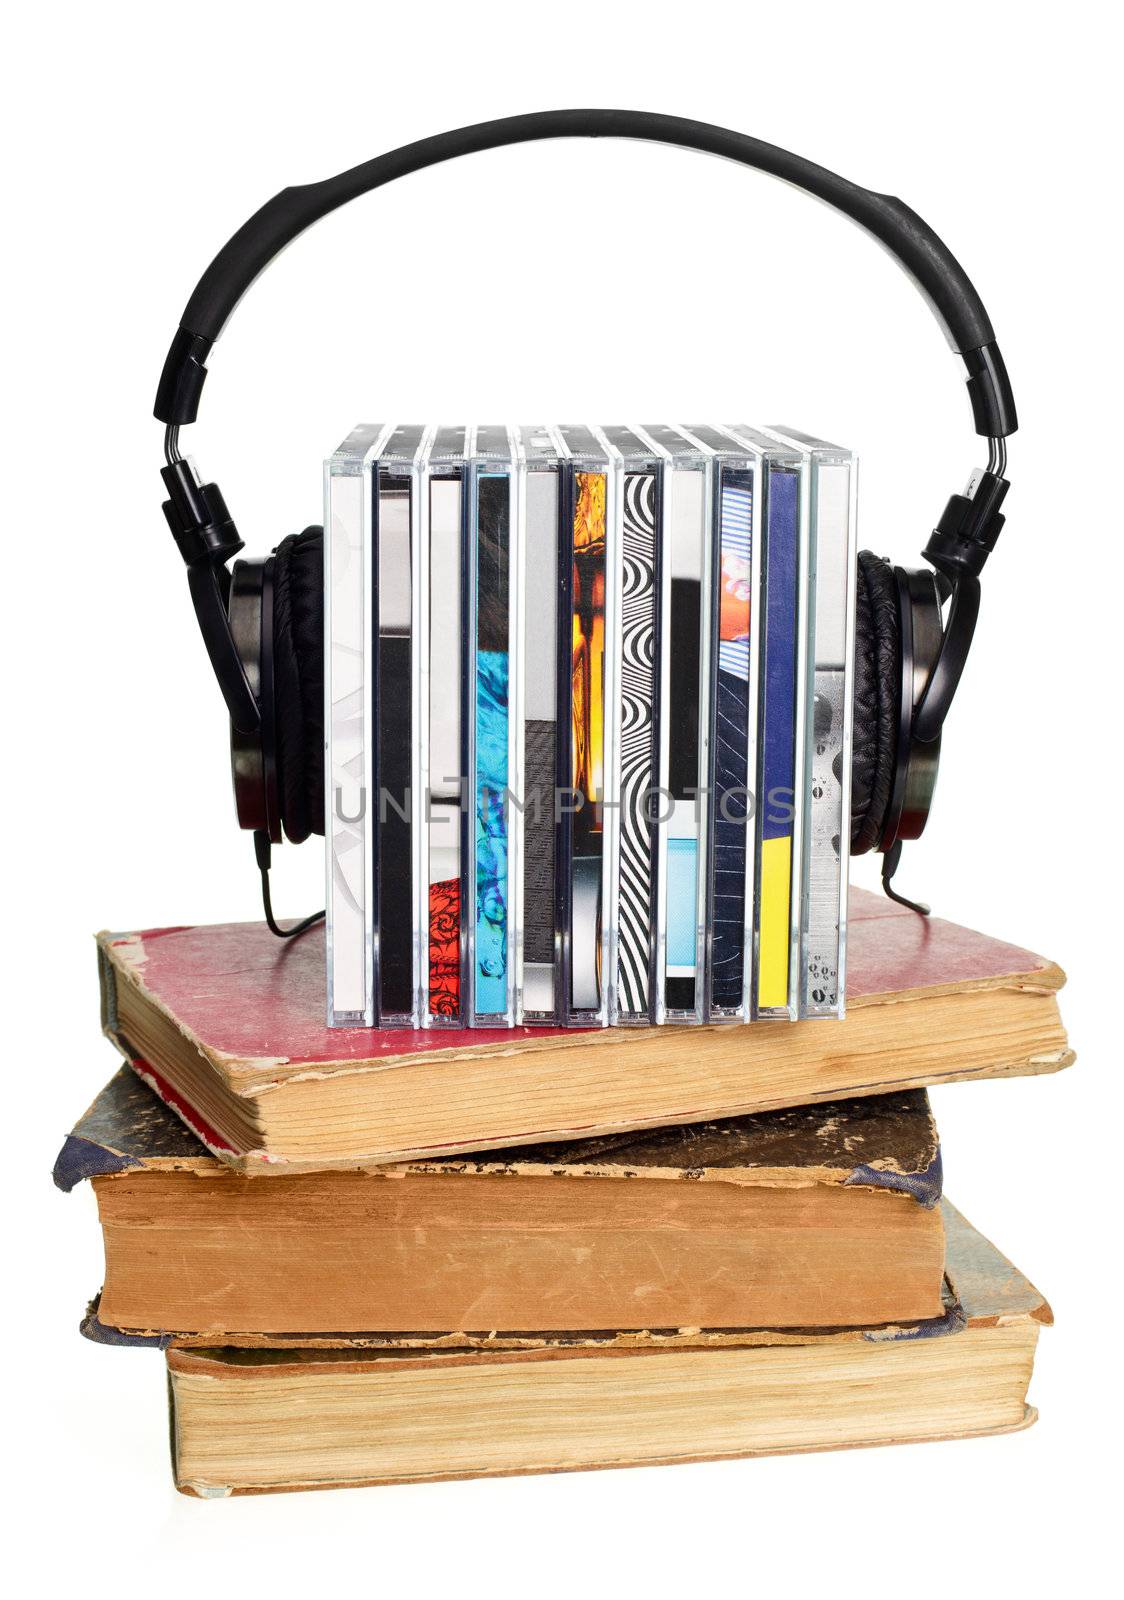 Stack of CDs with HI-Fi headphones and old books on white background